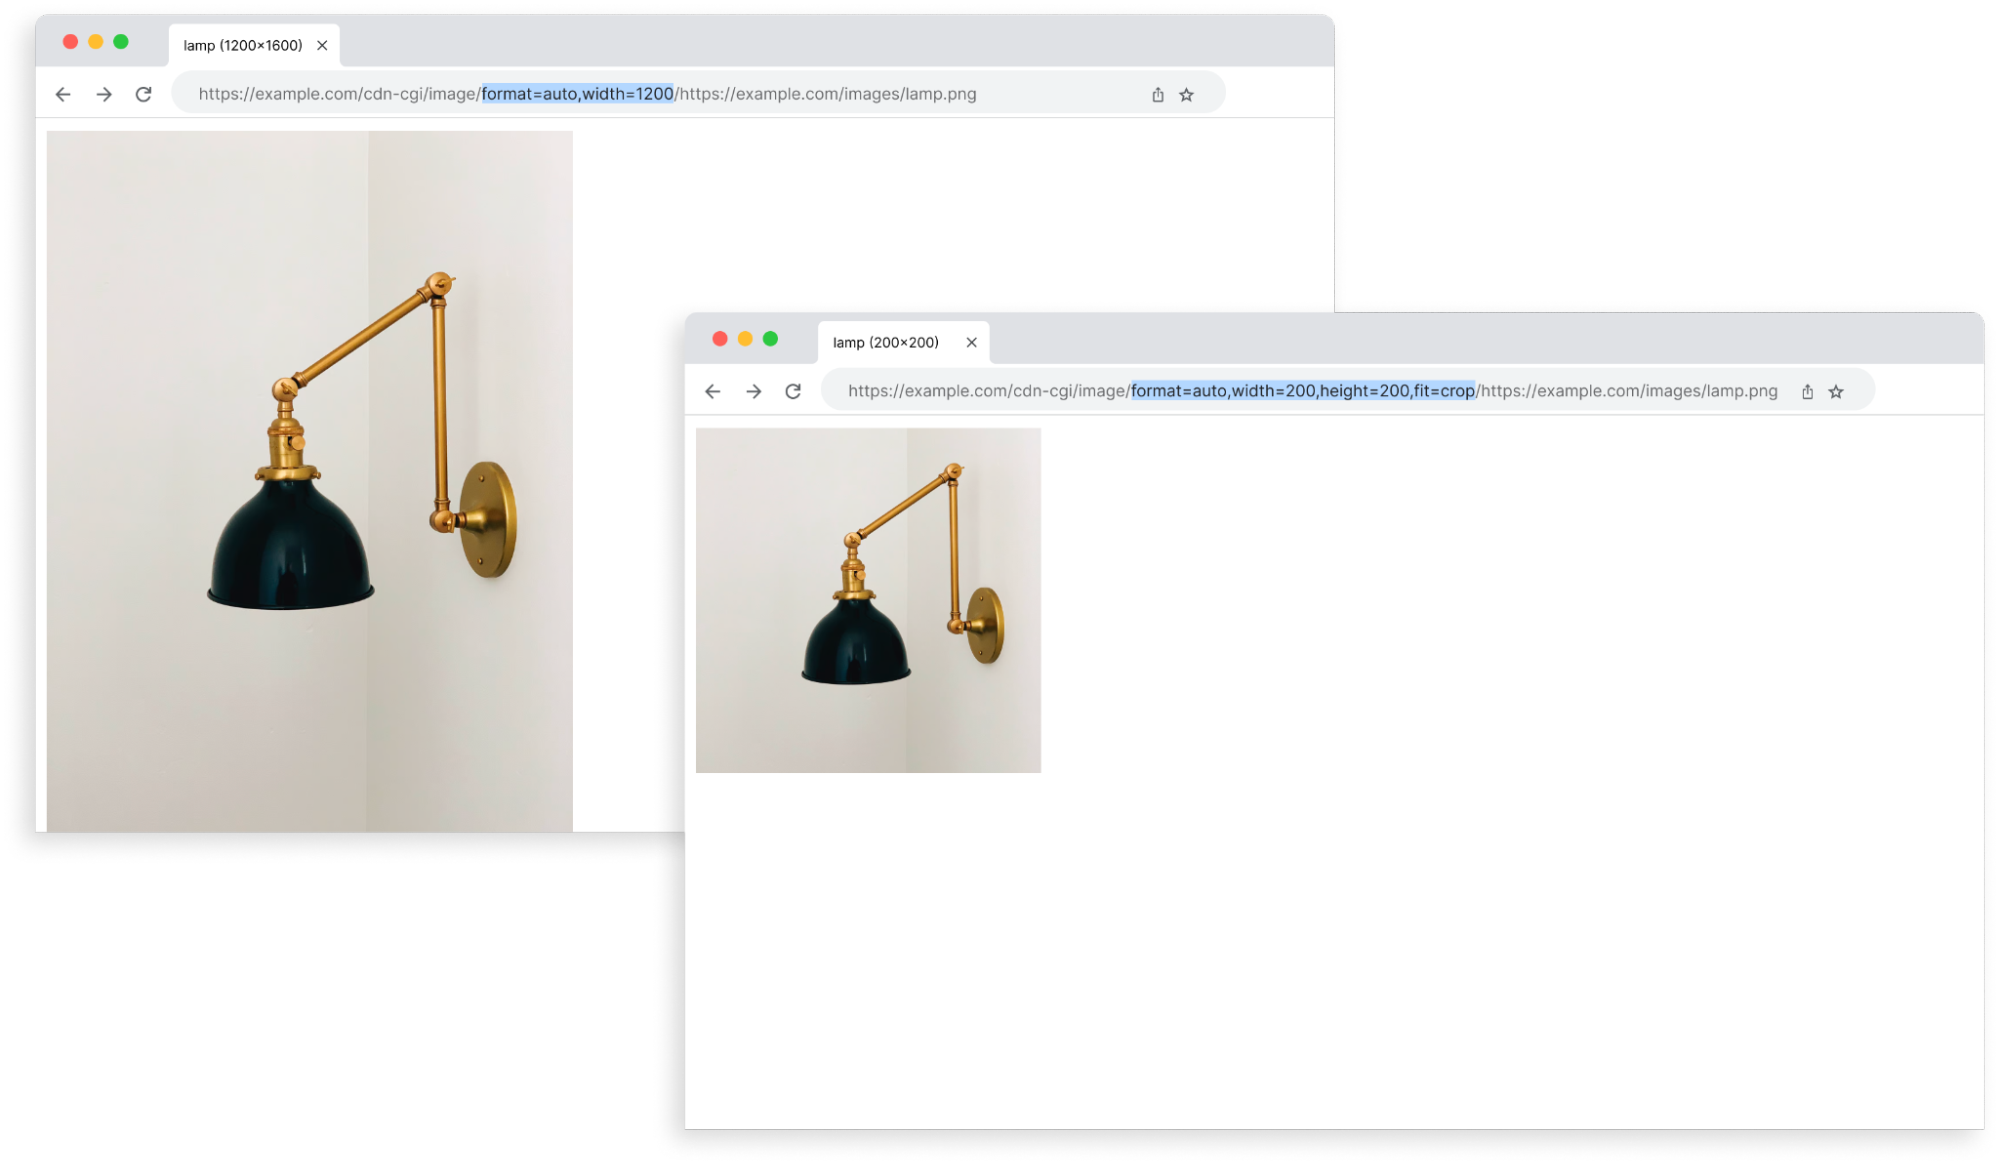 Two website pages that show how the same image of a lamp can be transformed in different ways by adding parameters to the URL.